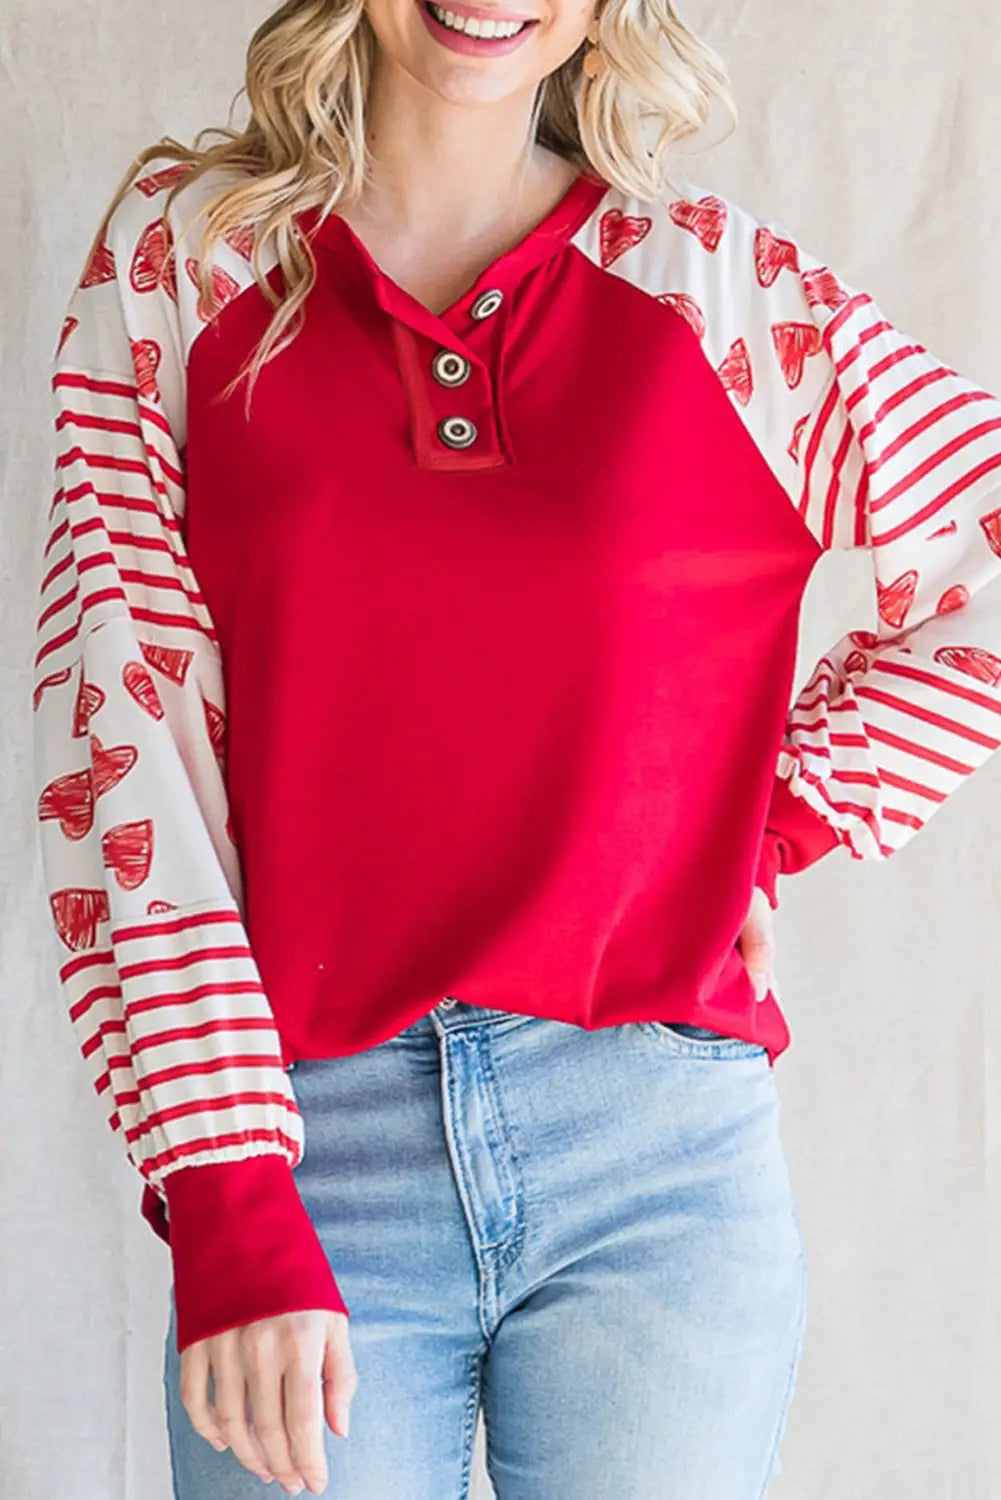 Fiery red heart striped raglan sleeve henley top - l / 68% cotton + 26.5% polyester + 5.5% elastane - blouses & shirts